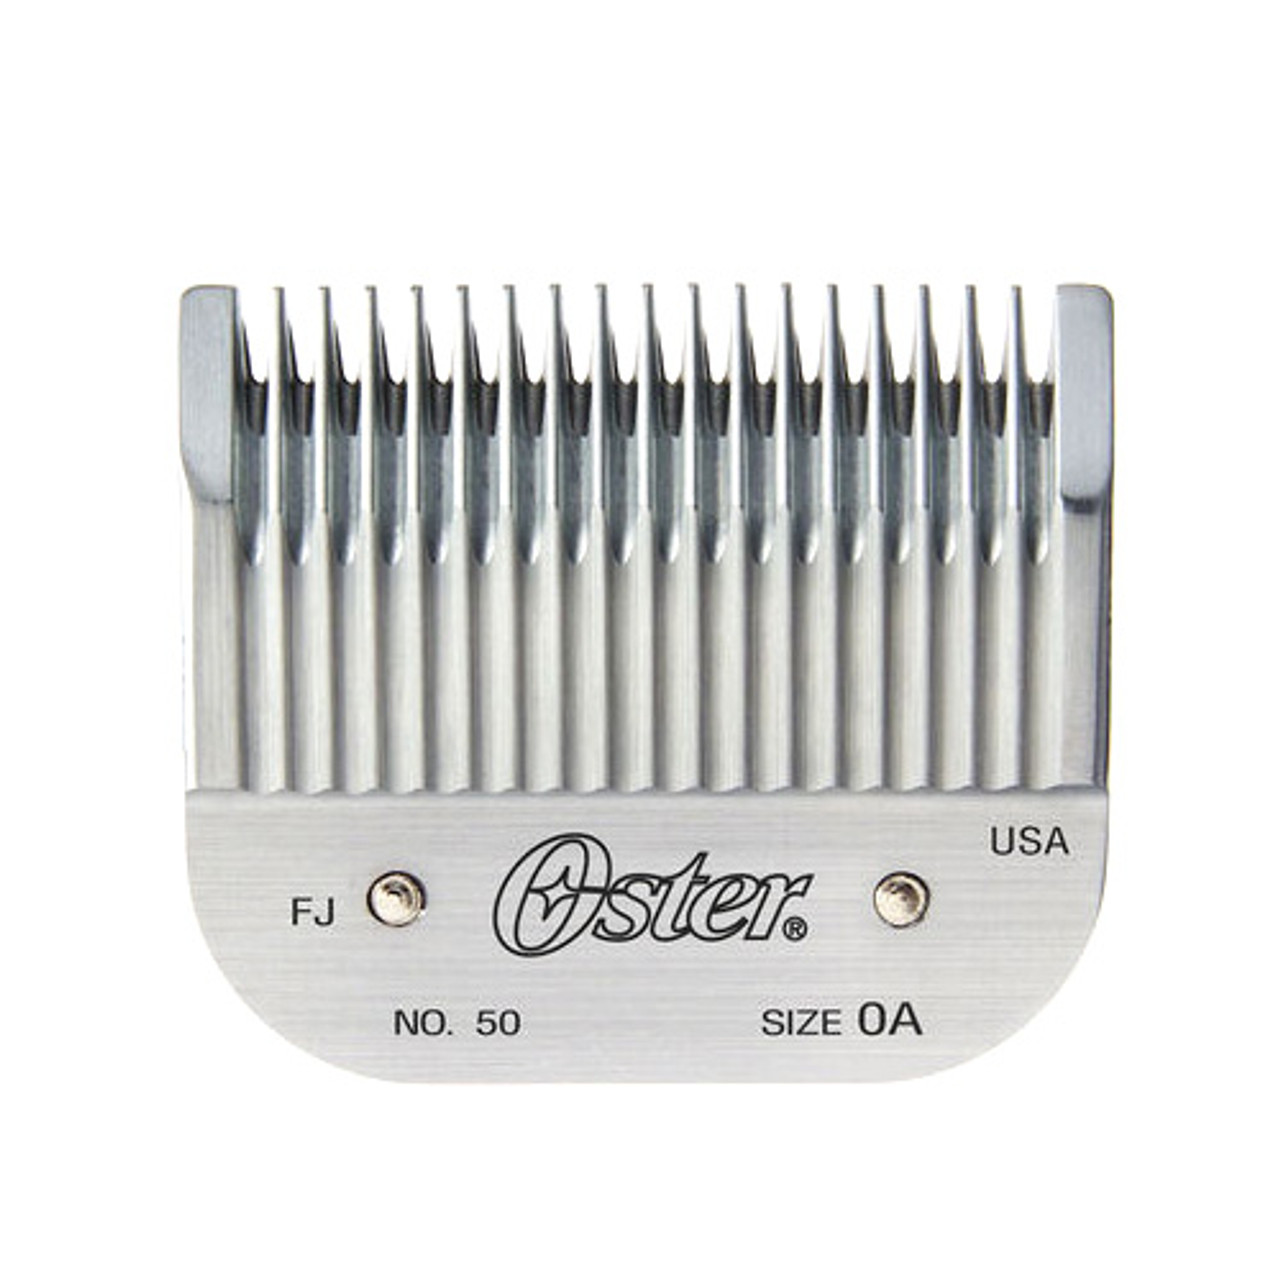 oster turbo 111 clippers